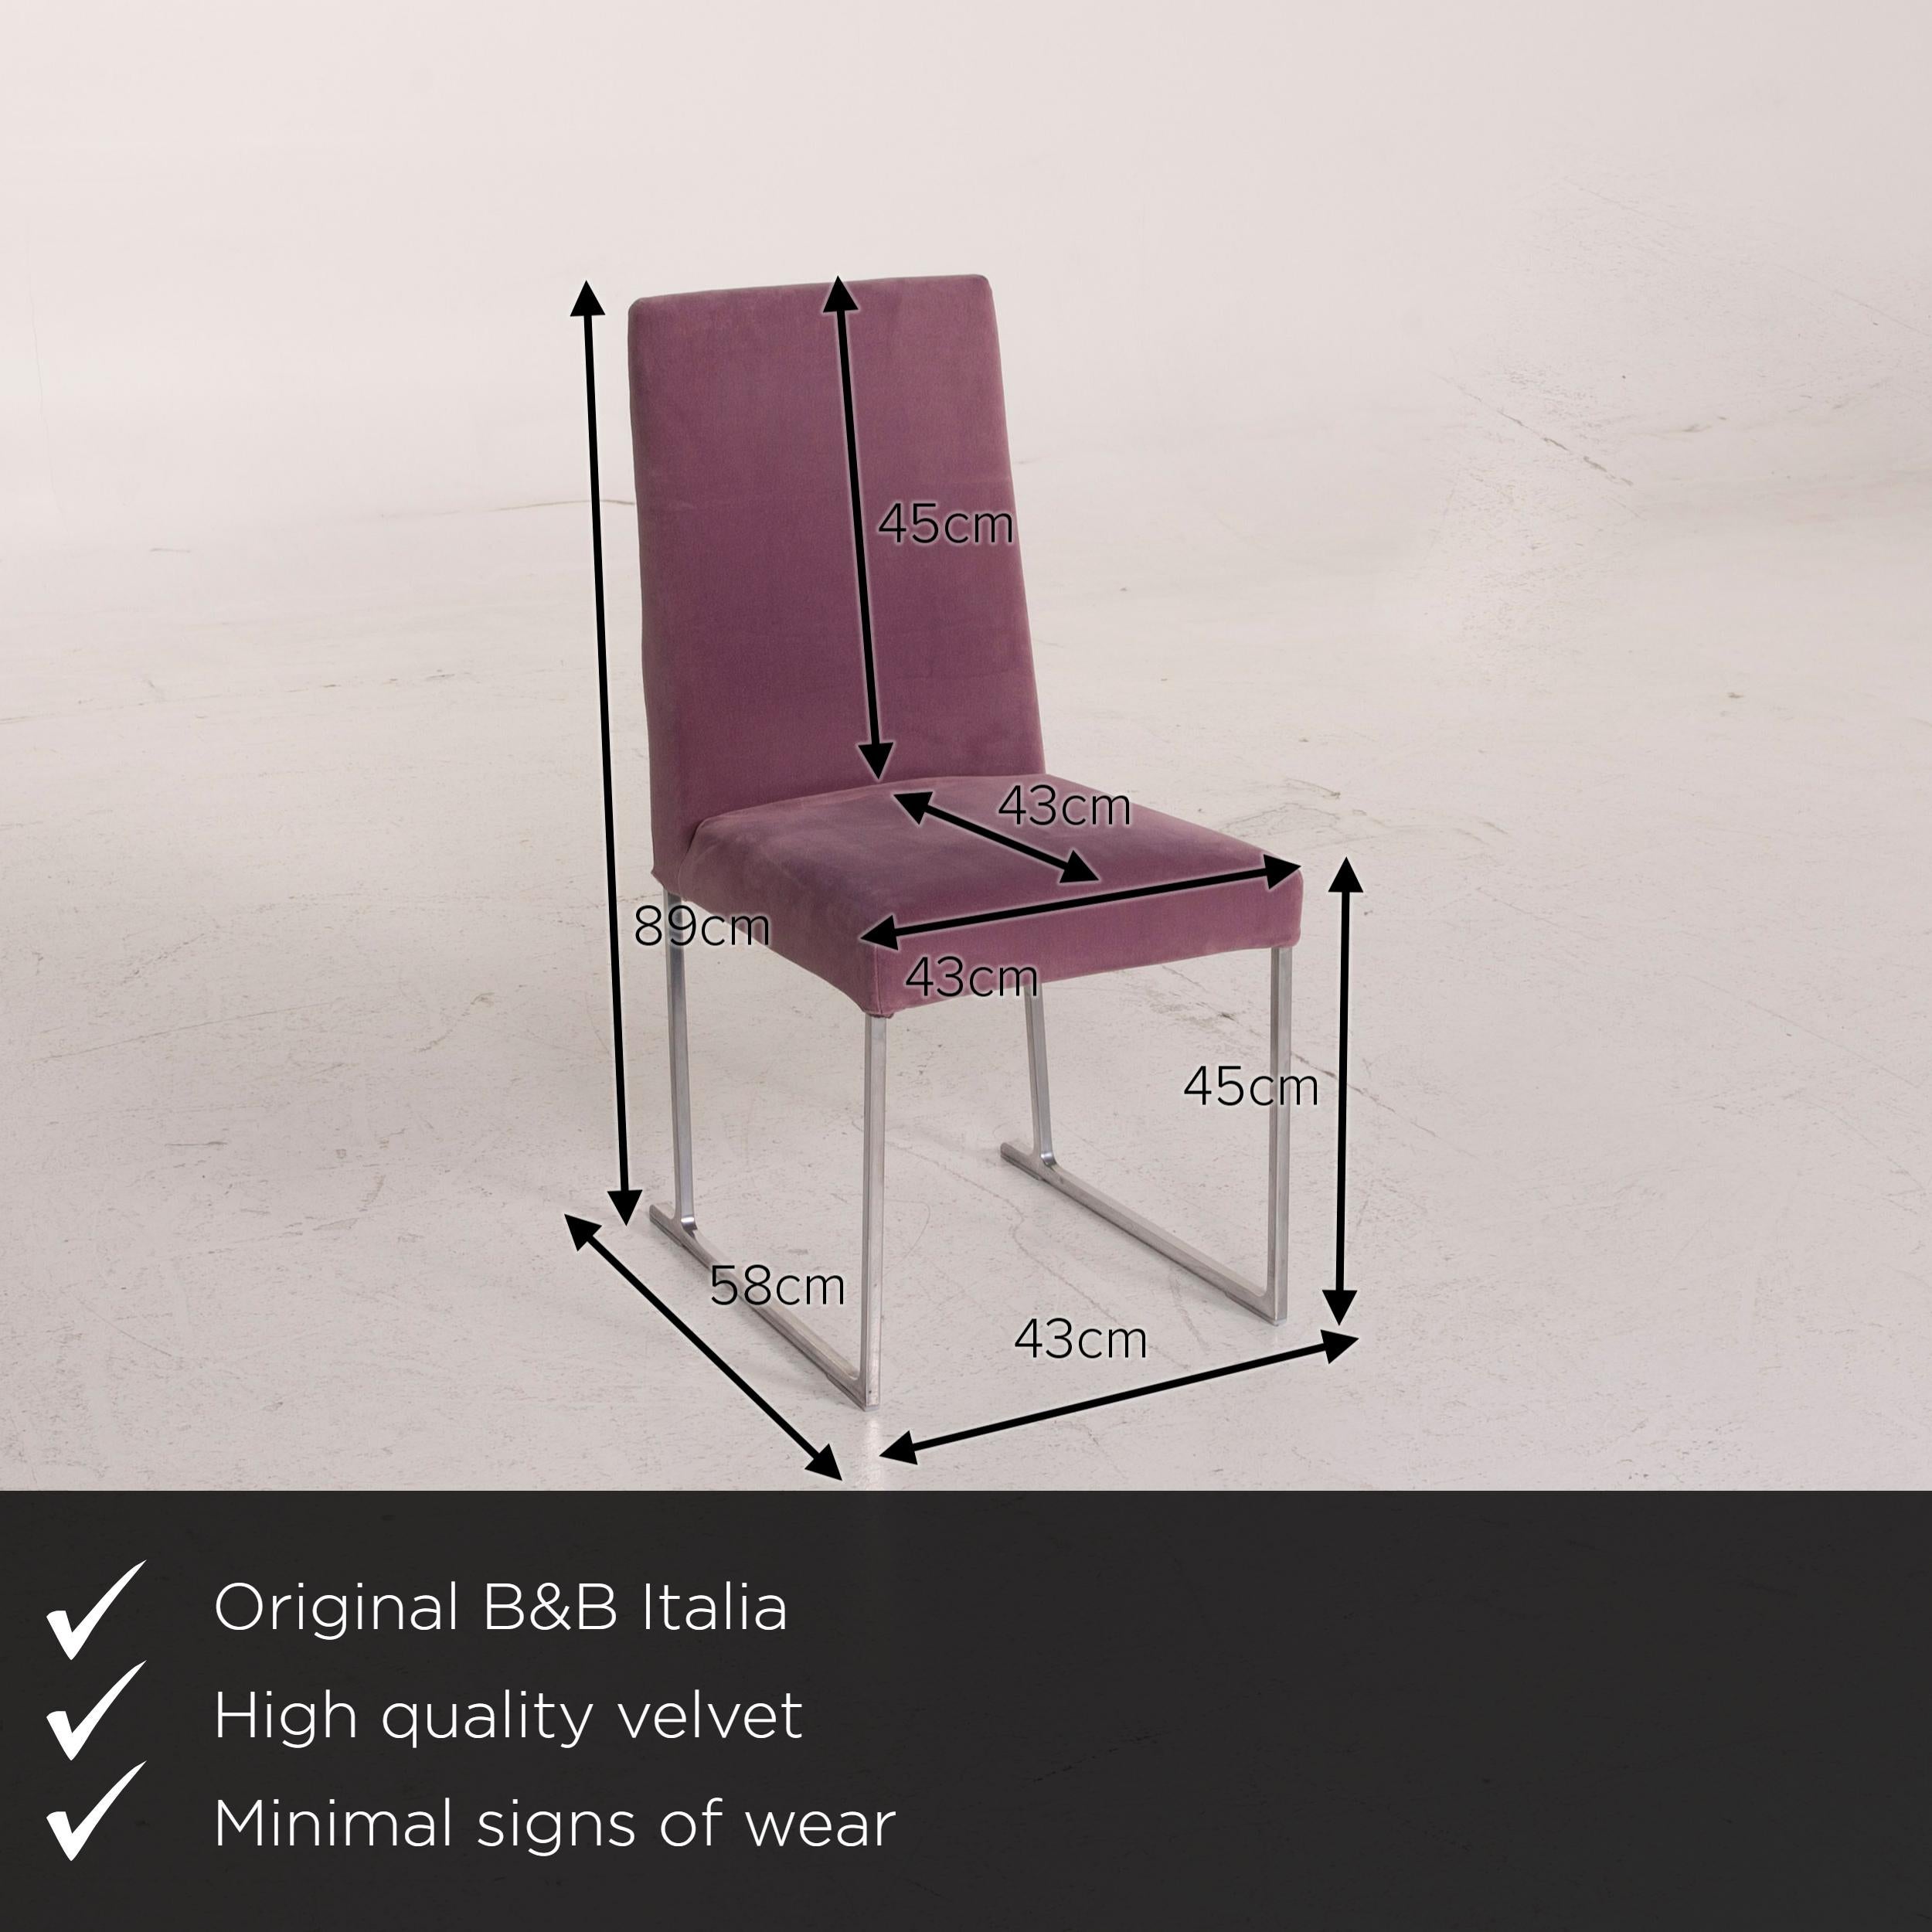 We present to you a B&B Italia Solo (B&B) velvet chair set lilac fabric set.
 

 Product measurements in centimeters:
 

Depth: 58
Width: 43
Height: 89
Seat height: 45
Seat depth: 43
Seat width: 43
Back height: 45.

 